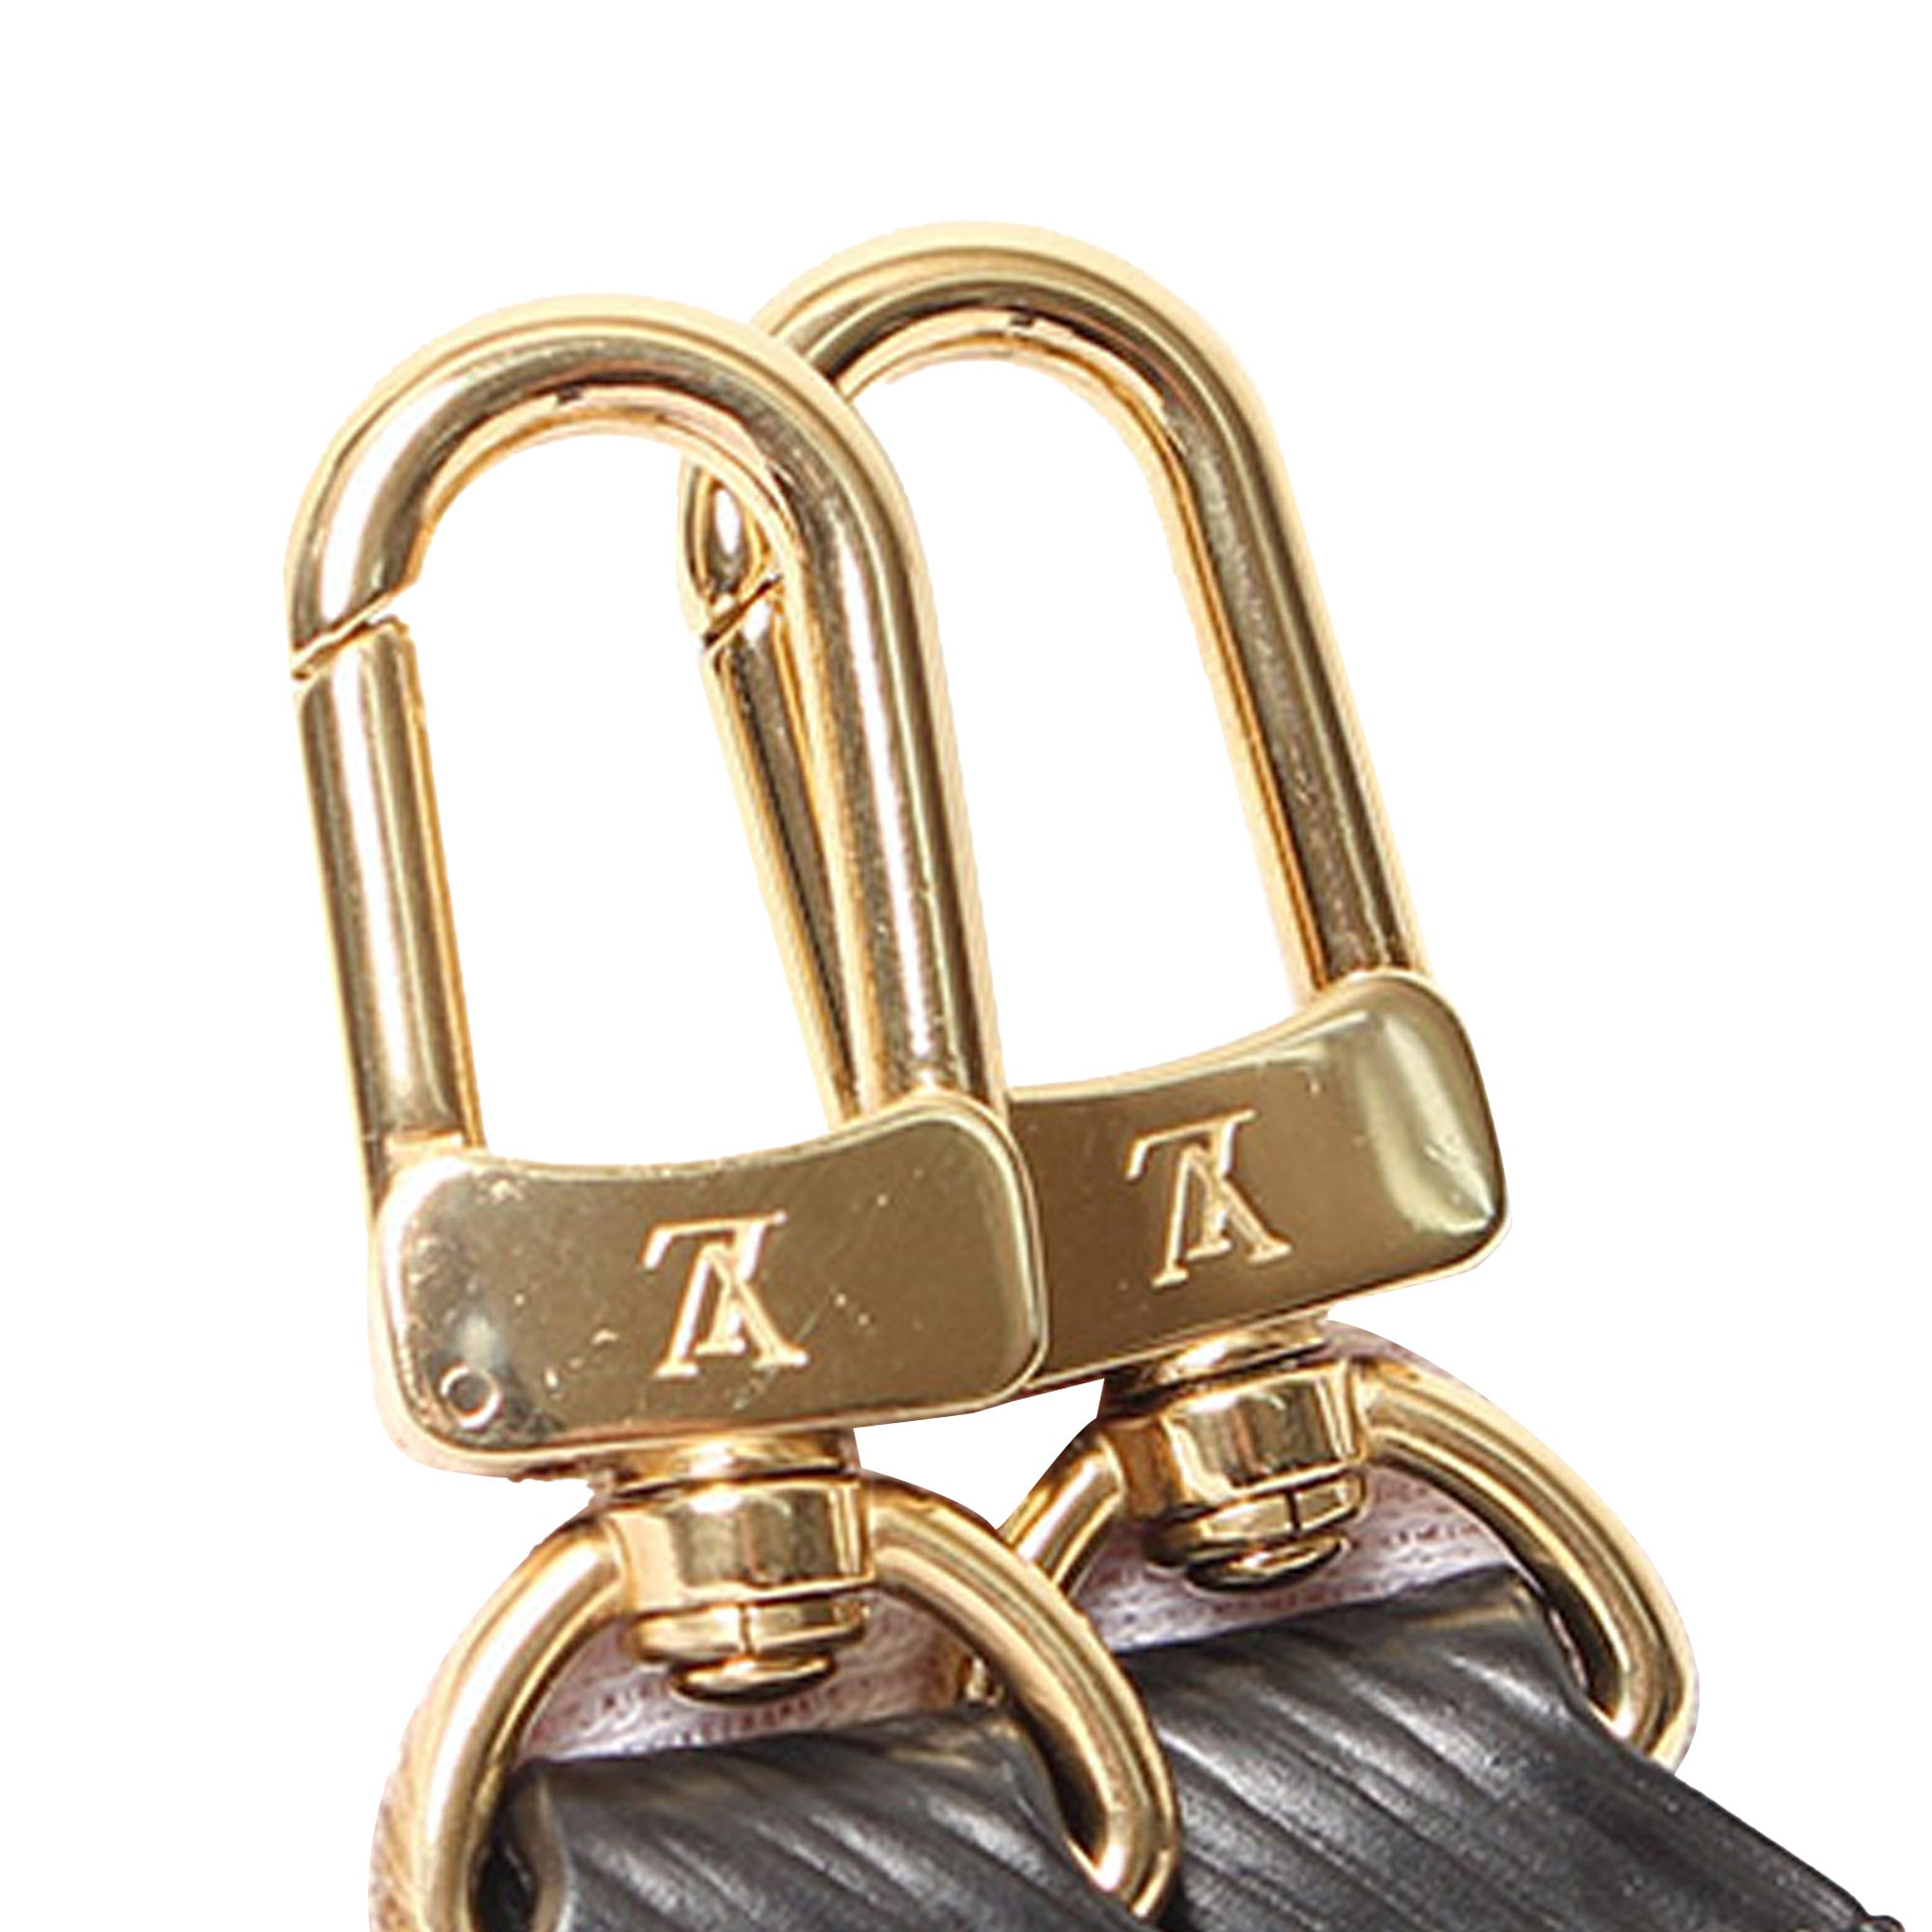 Authentic LV Silver Padlock with keys. Taken from LV Alma BB that